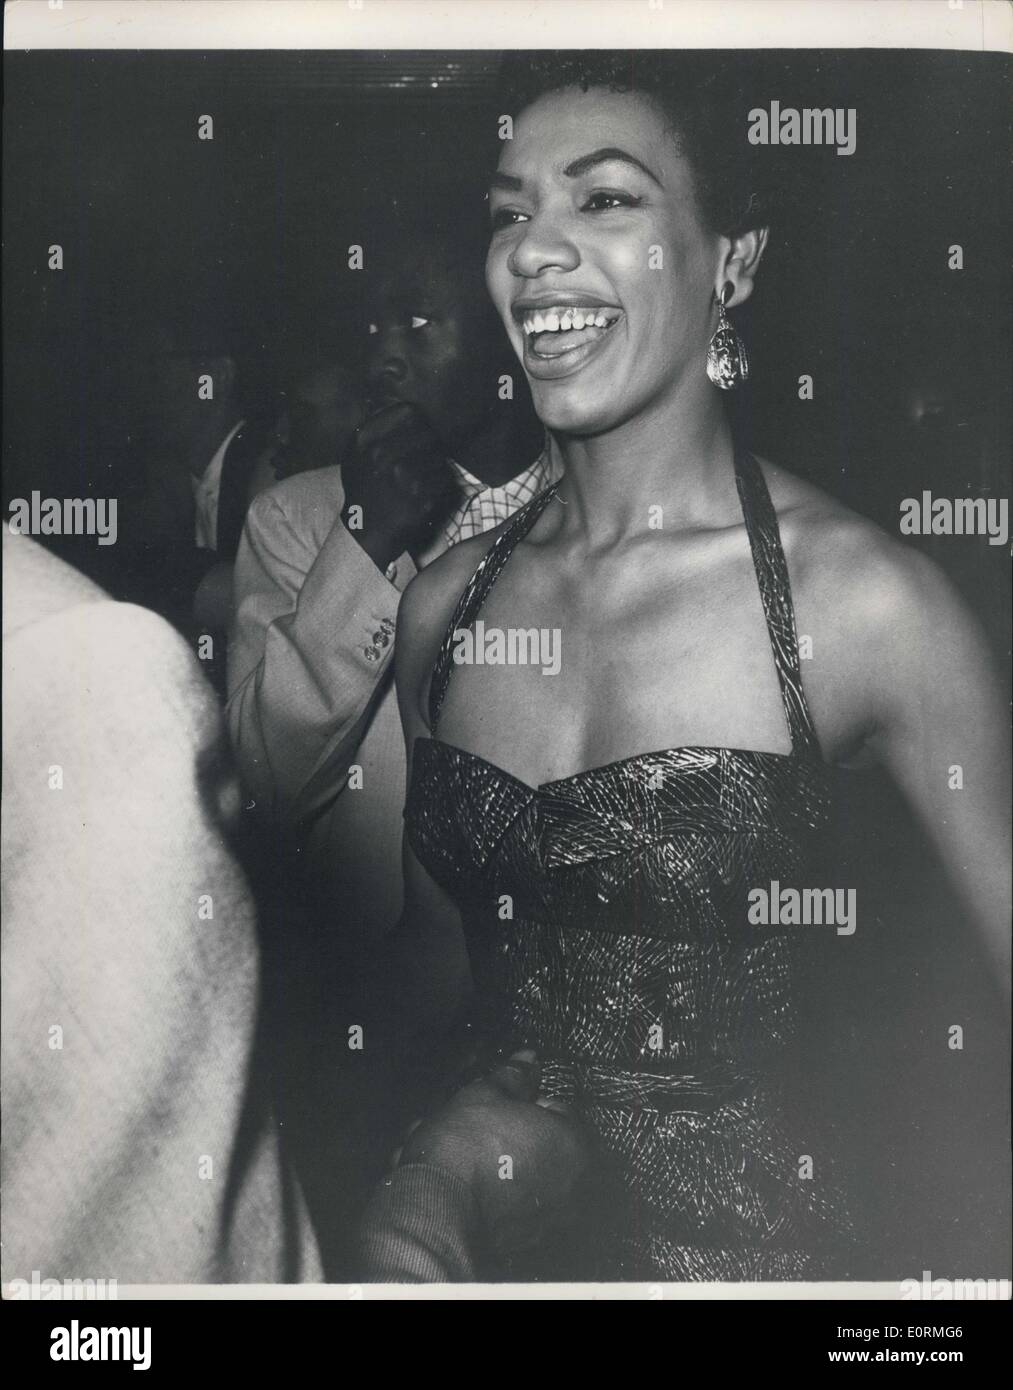 Jan 1, 1960 - Everything''s harnessed to the rhythm of the land this girl is a keen dance of the Americana club. she is literally vibrating all over mamba music. Stock Photo